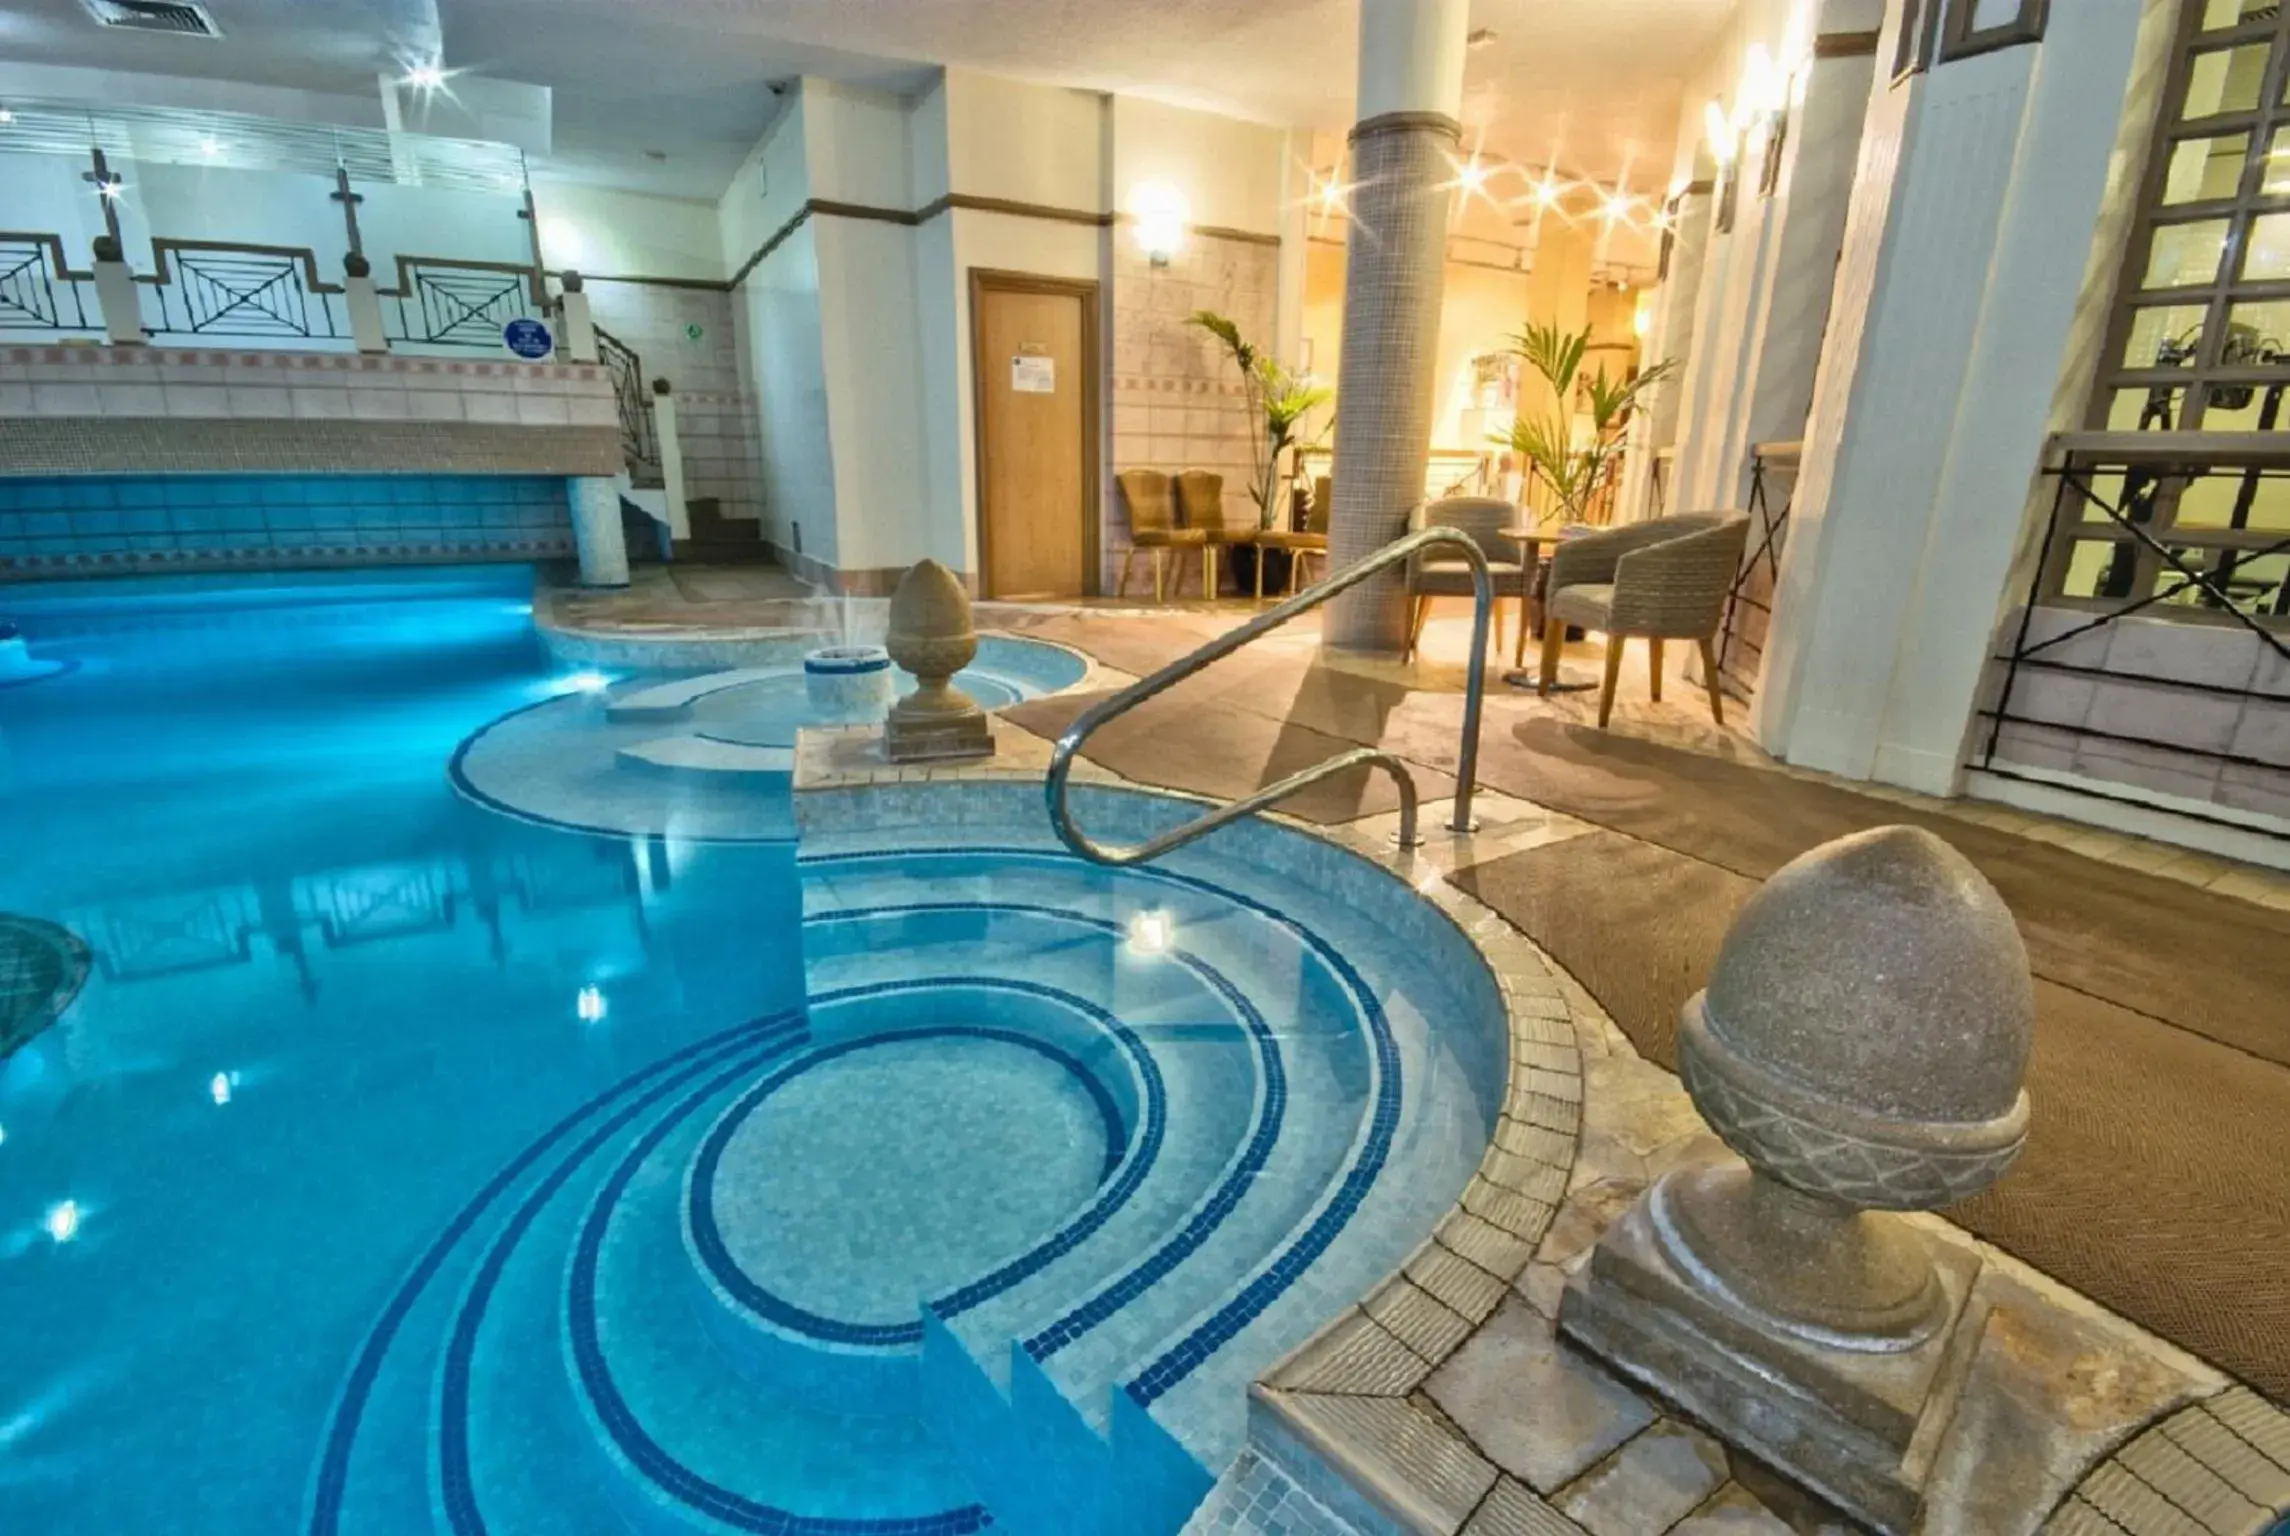 Area and facilities, Swimming Pool in Beaufort House - Knightsbridge